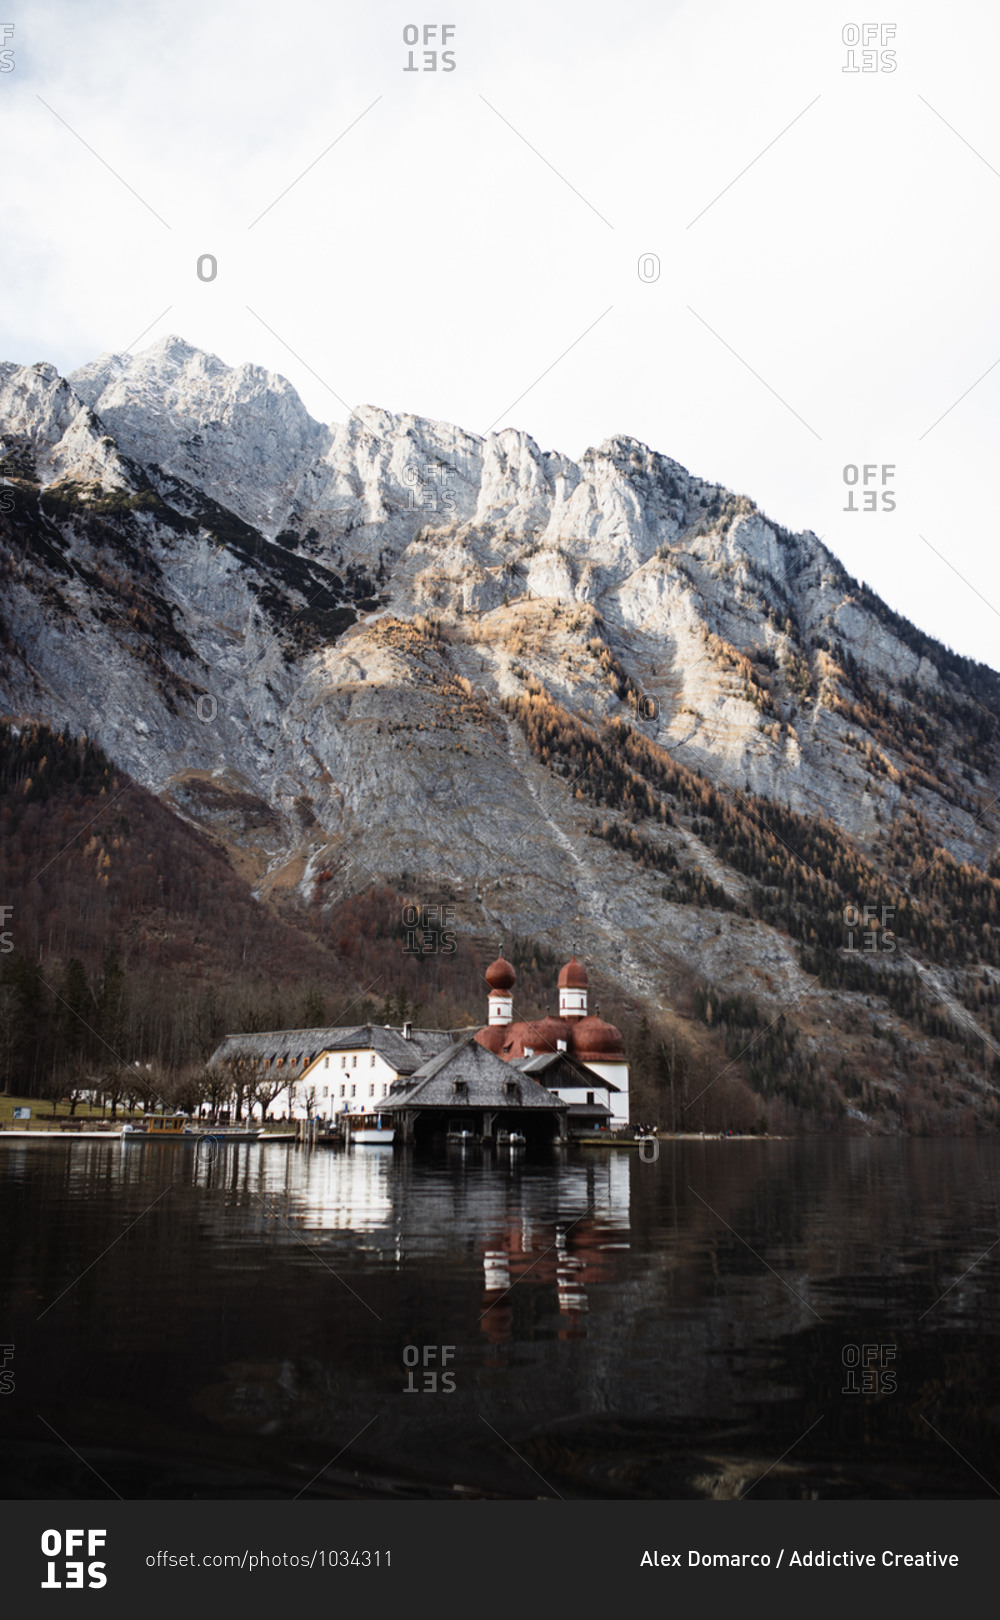 Picturesque landscape with small village houses and church
located on shore of calm lake against rough rocky slope of mountain
covered with snow in sunny autumn weather stock photo -
OFFSET